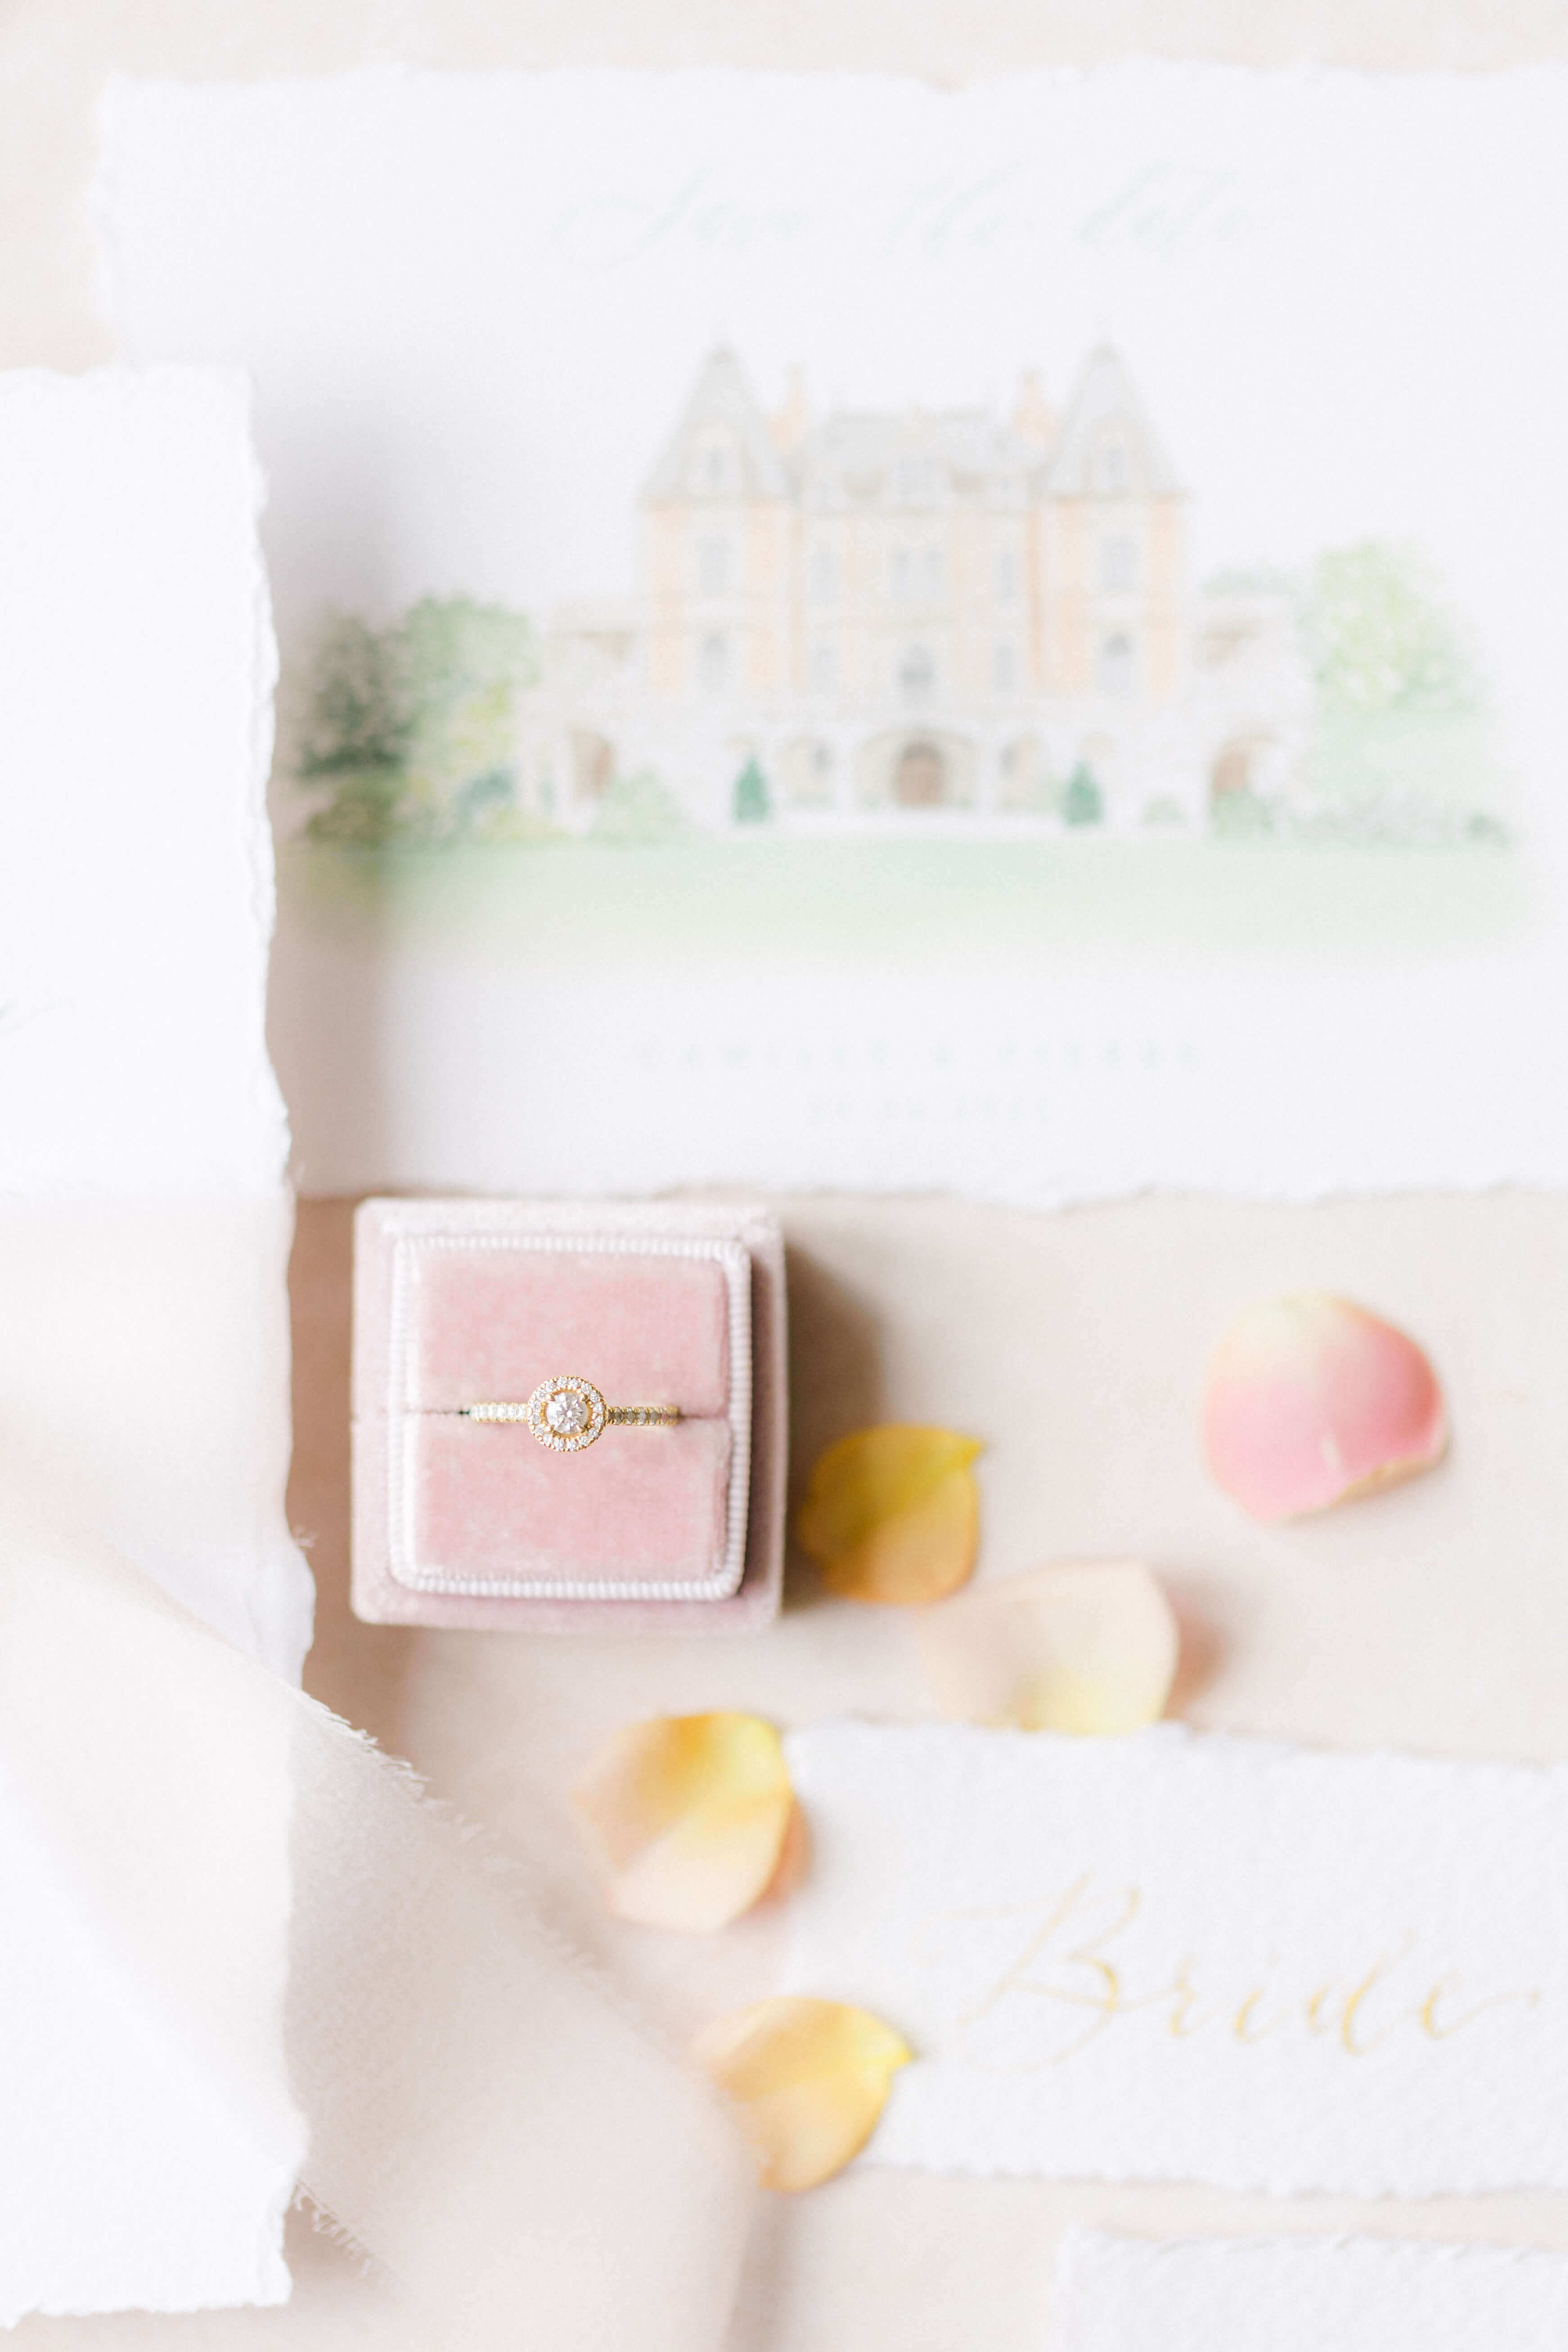  pastel pink ring box holding a diamond engagement ring, sitting on a wedding invitation representing Chateau Bouffemont, some pink and peach rose petals scattered and a white placecard with Bride written on it